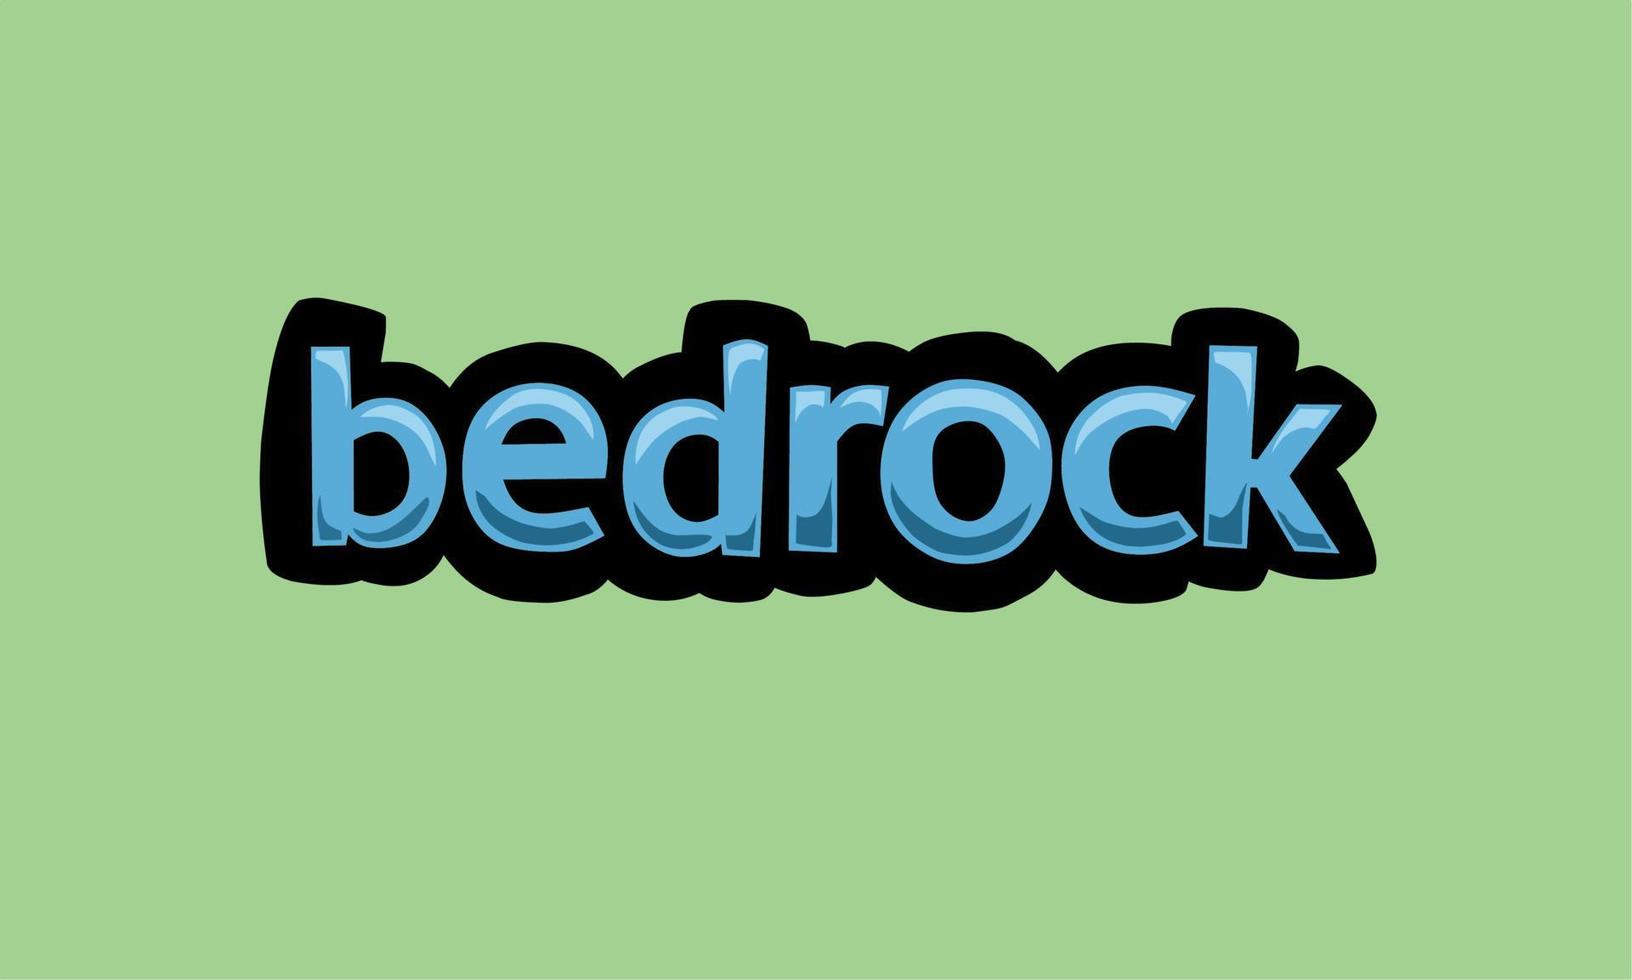 bedrock writing vector design on a green background